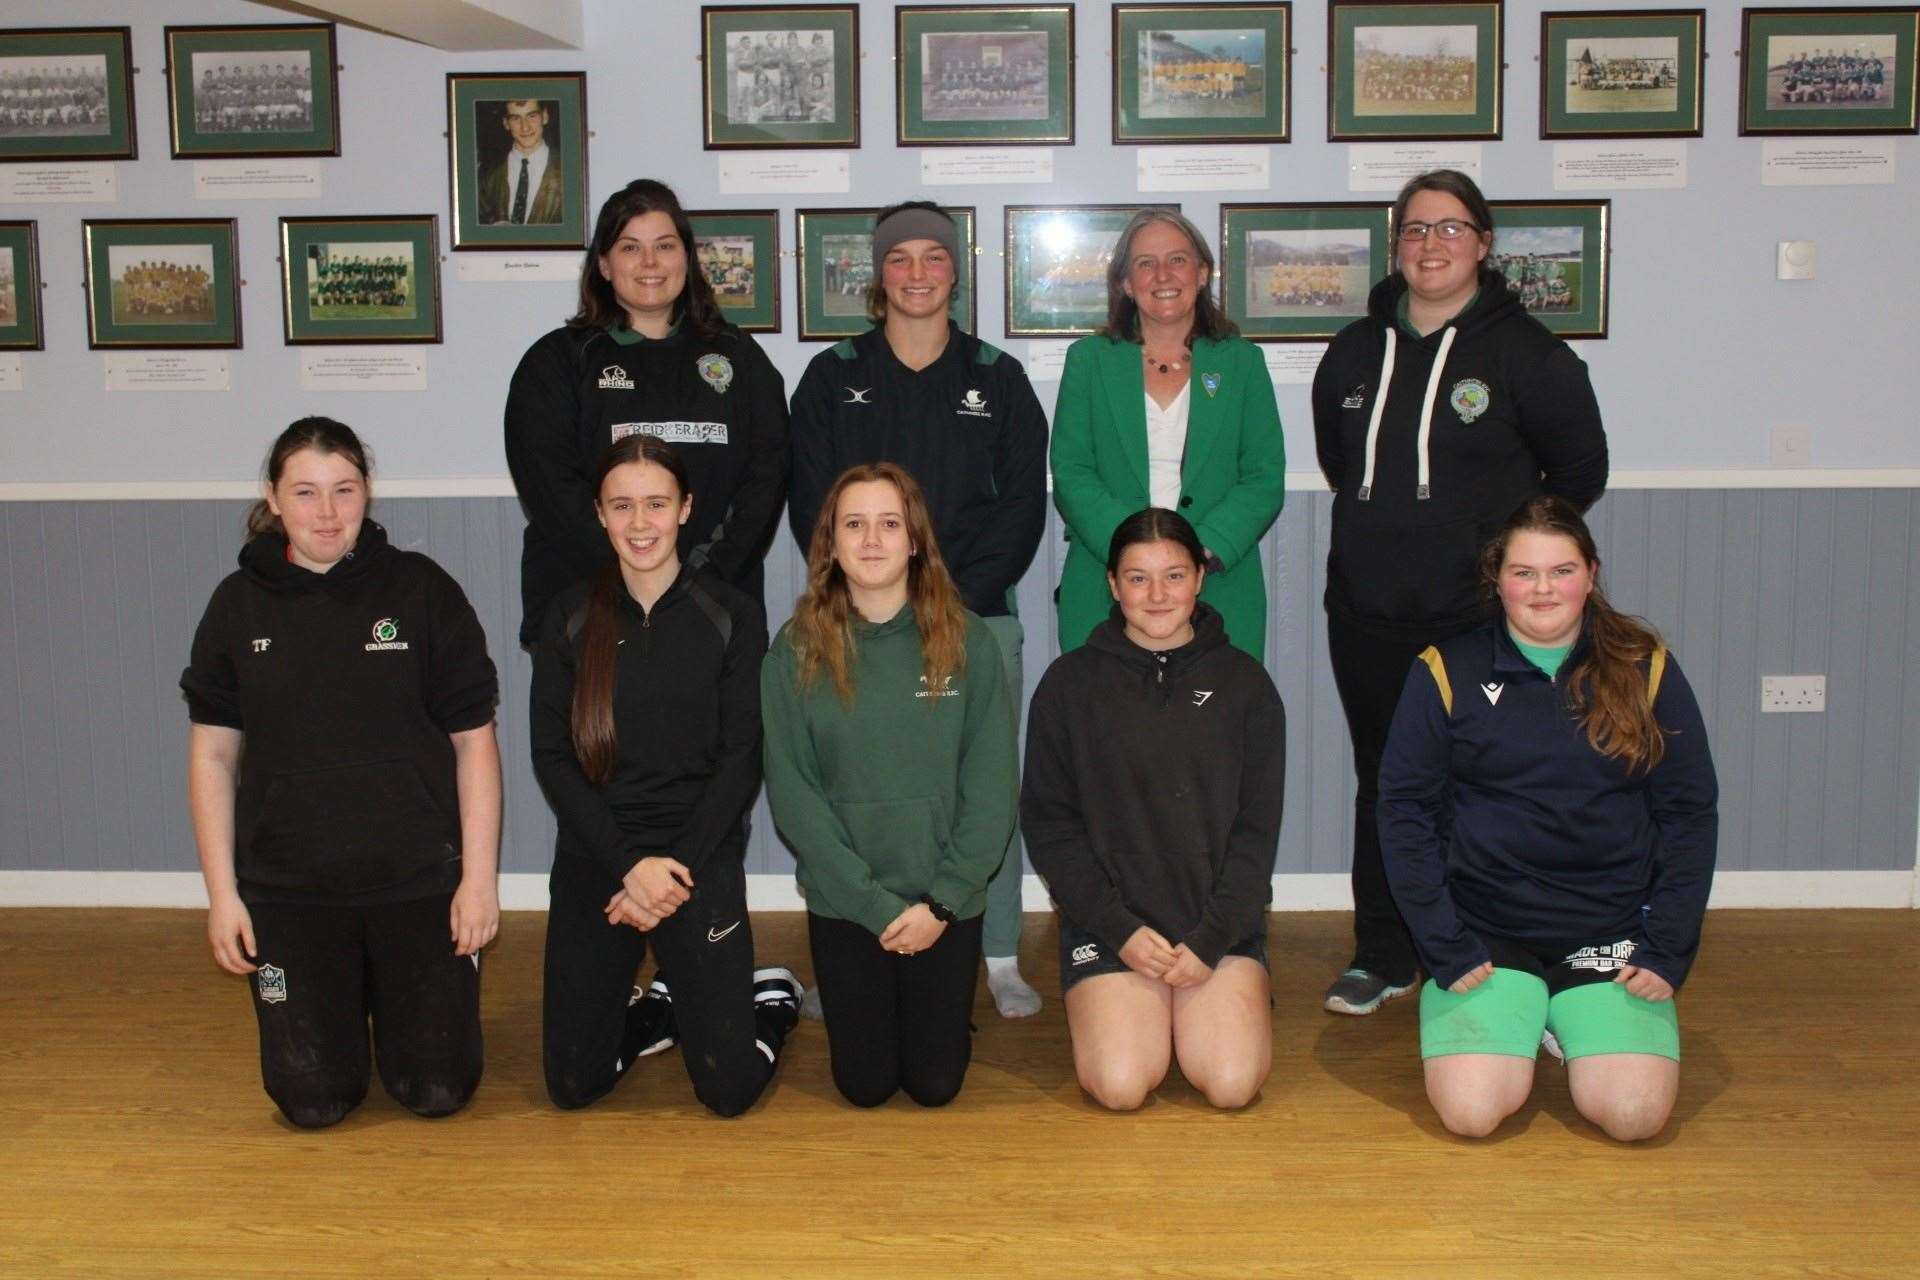 Scottish Government sports minister Maree Todd met with members of Caithness Rugby Club's women's section.